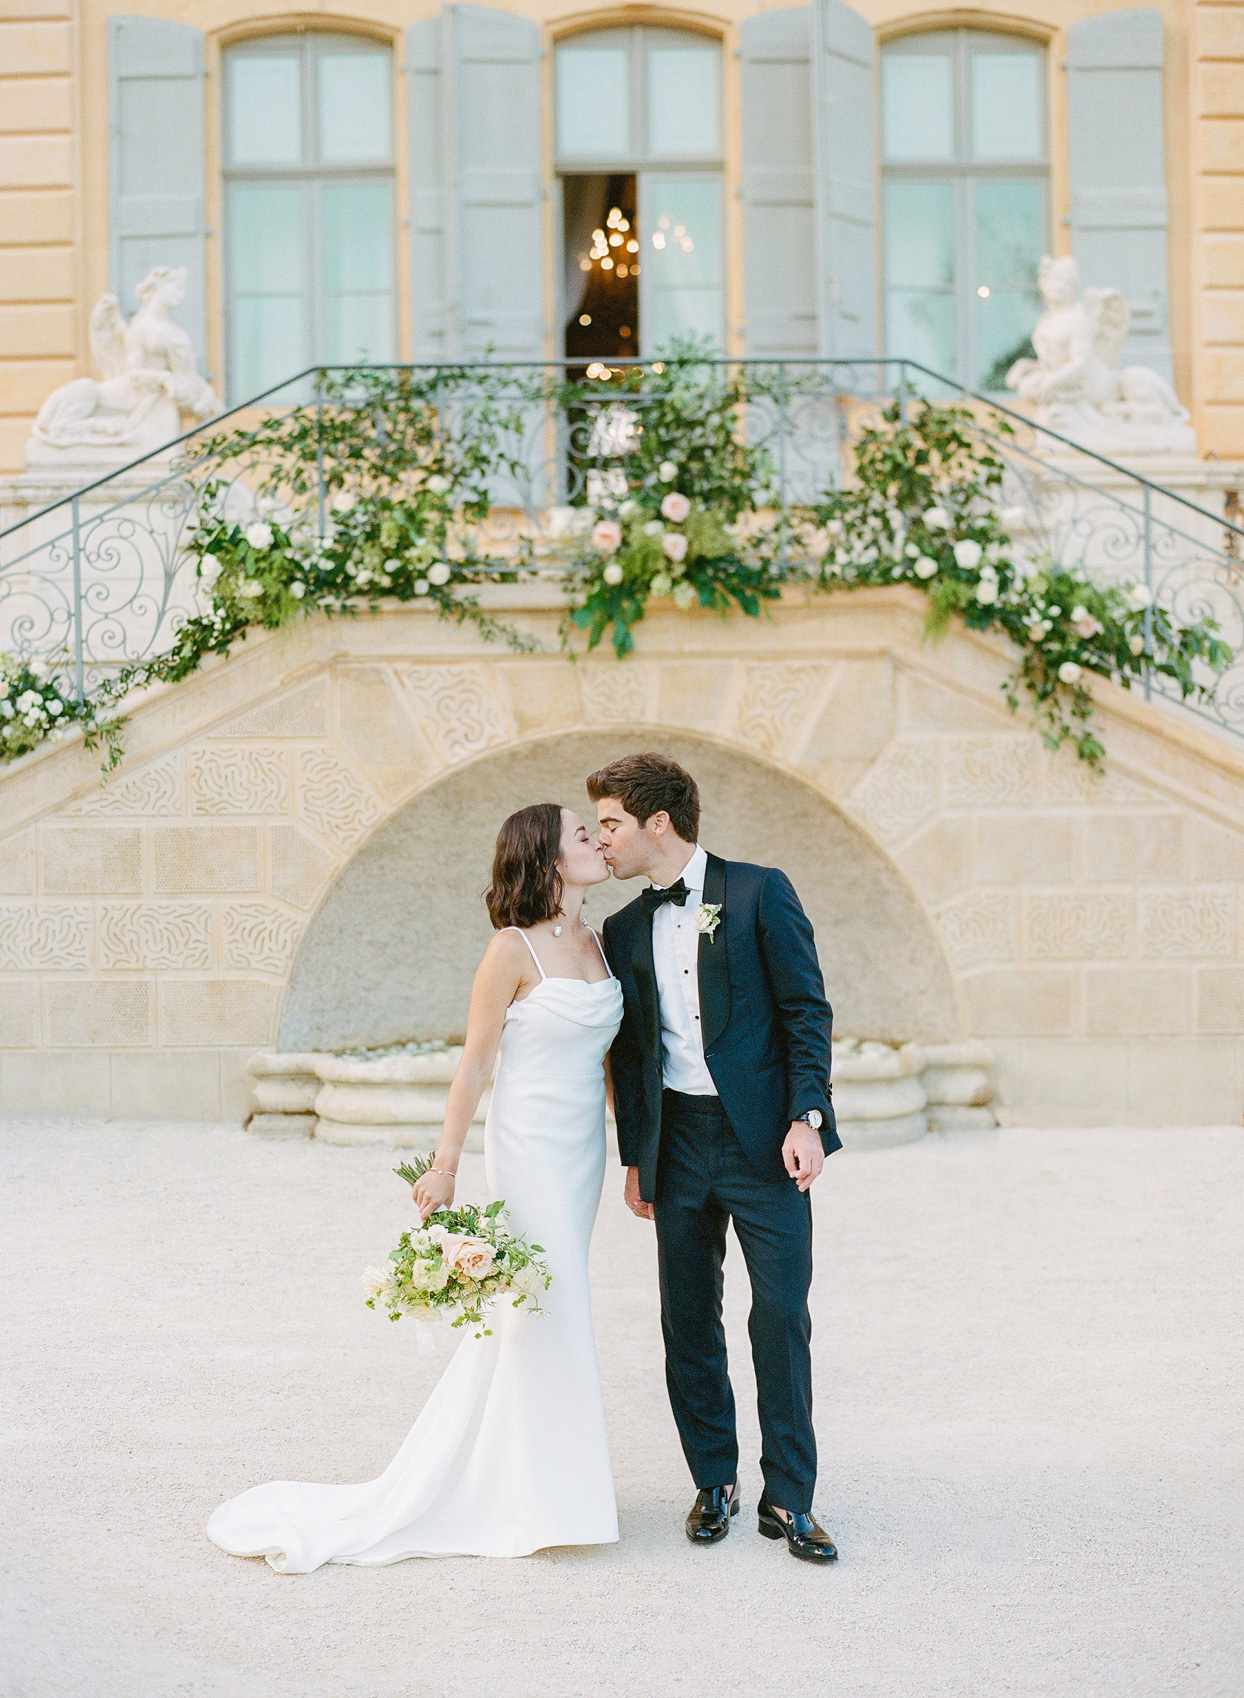 bride and groom kissing in front of french chateau